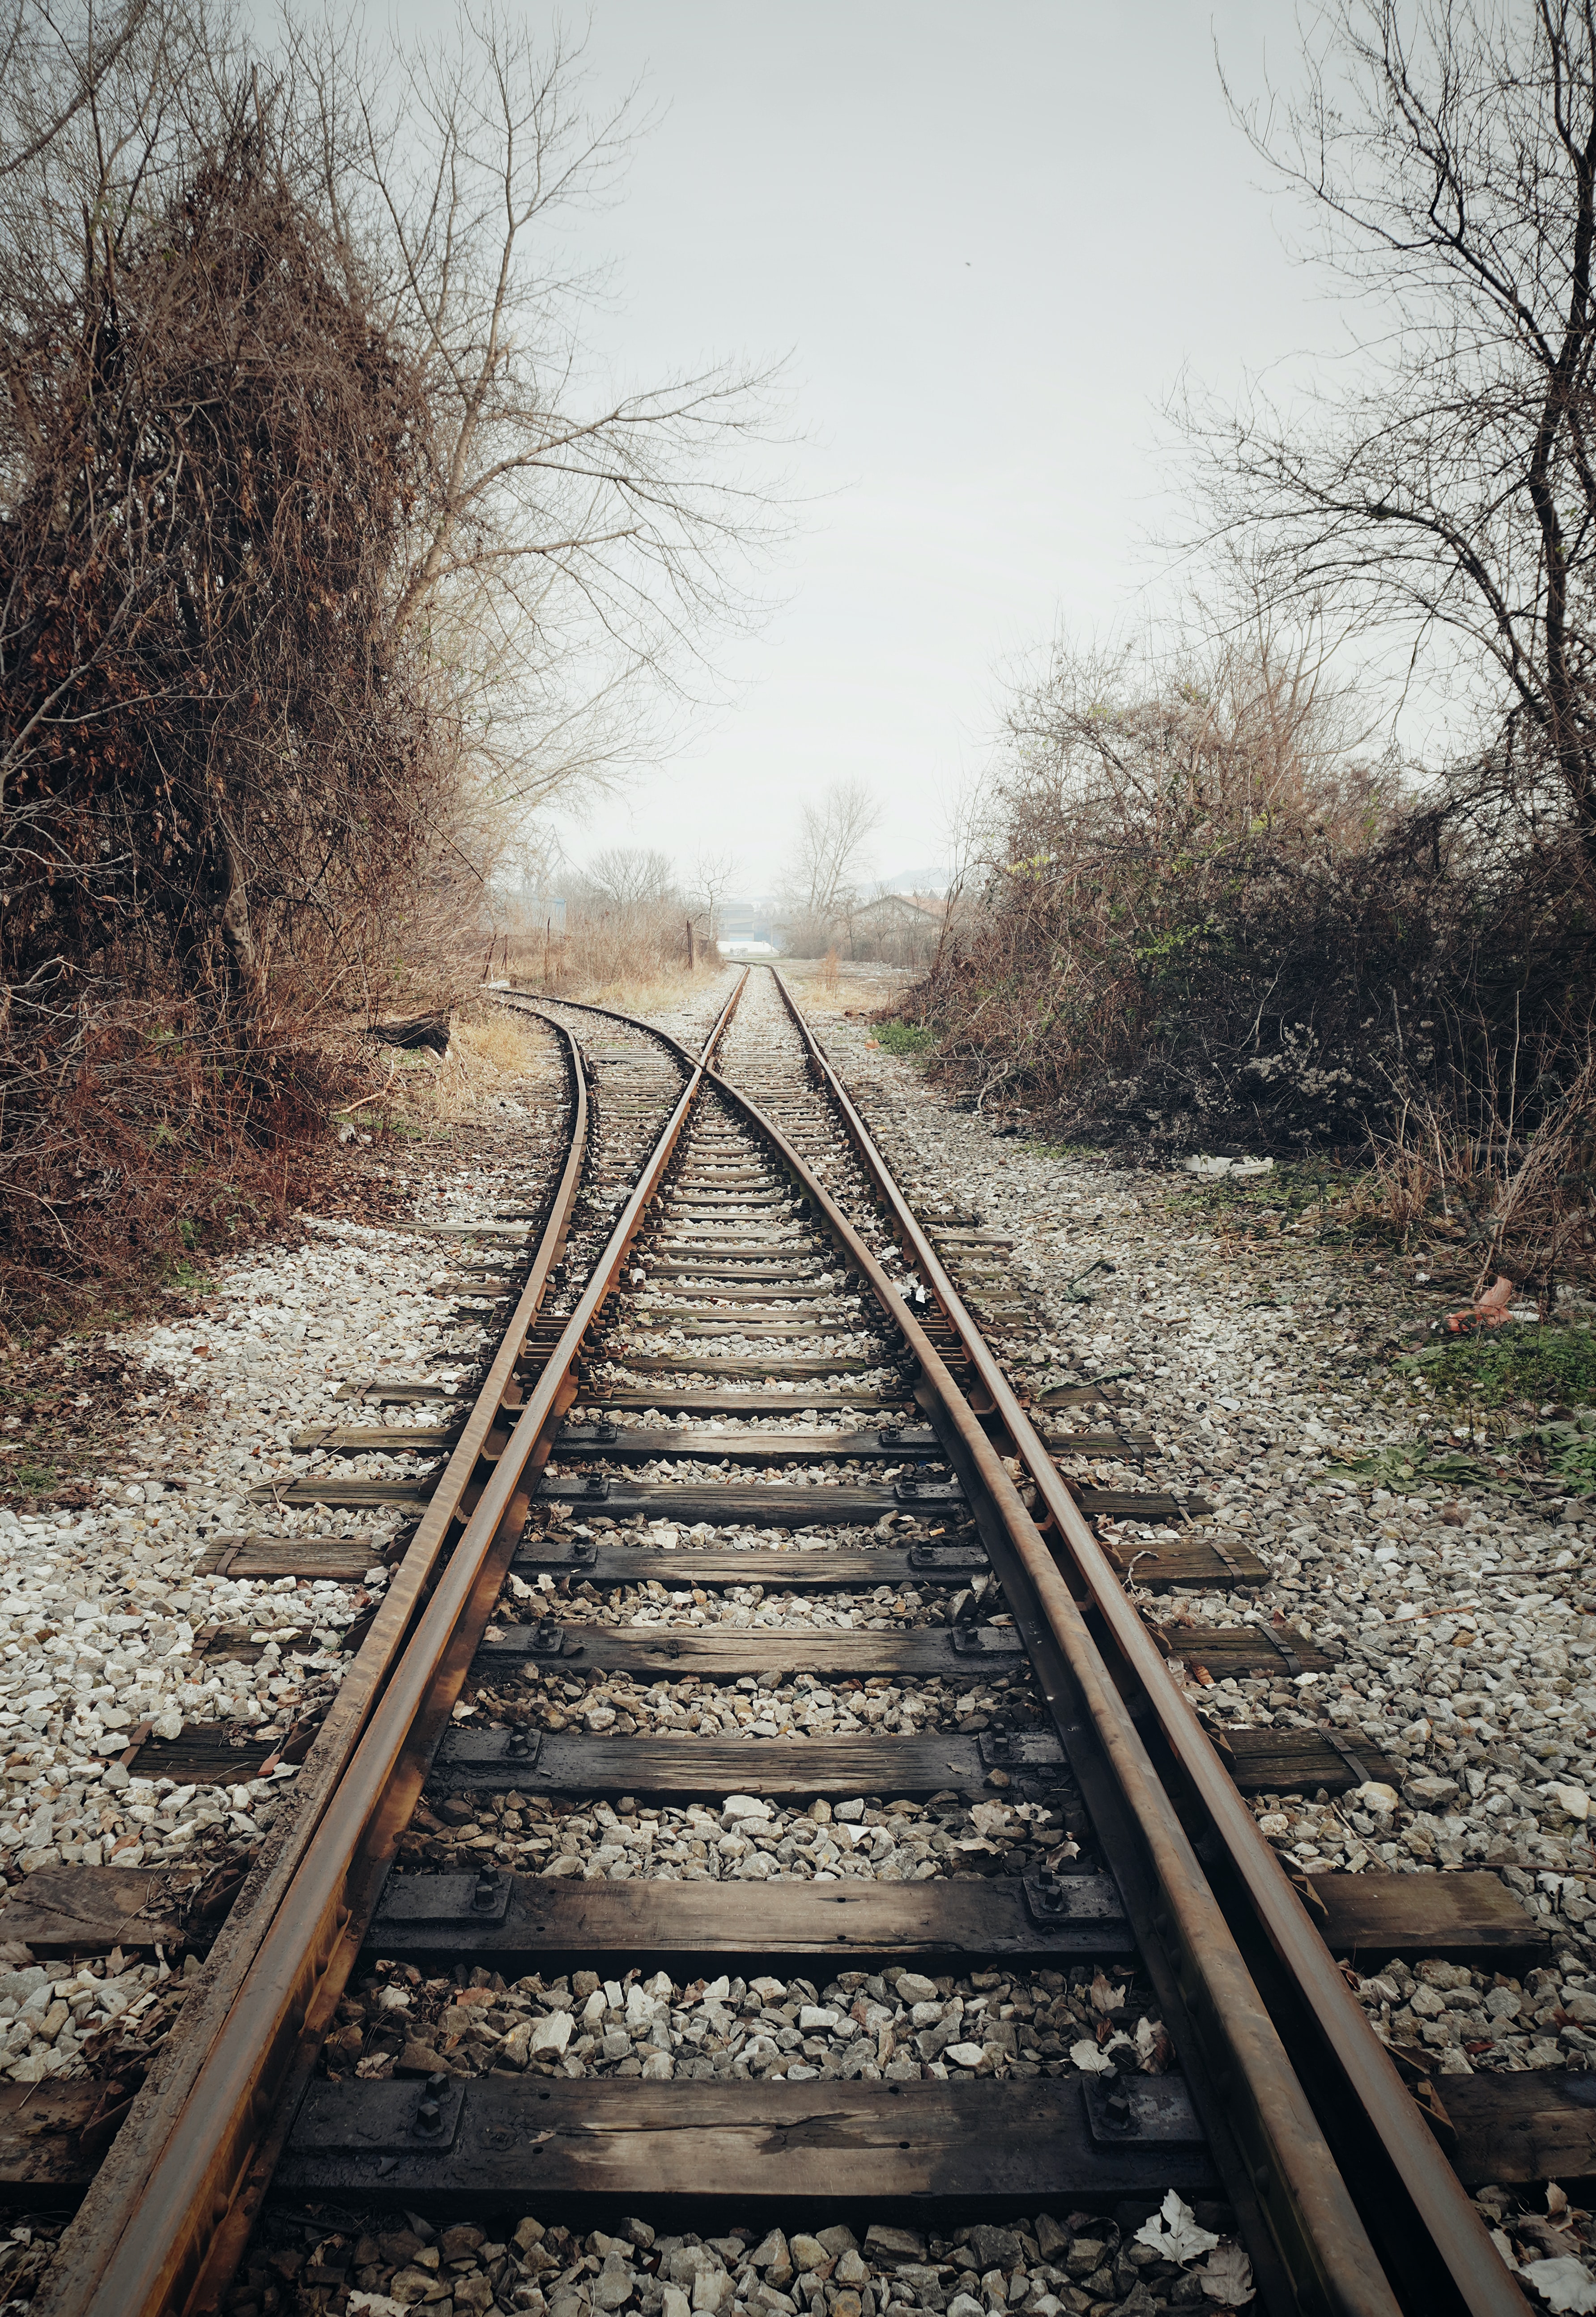 You will have to consider two directions in your CRM journey